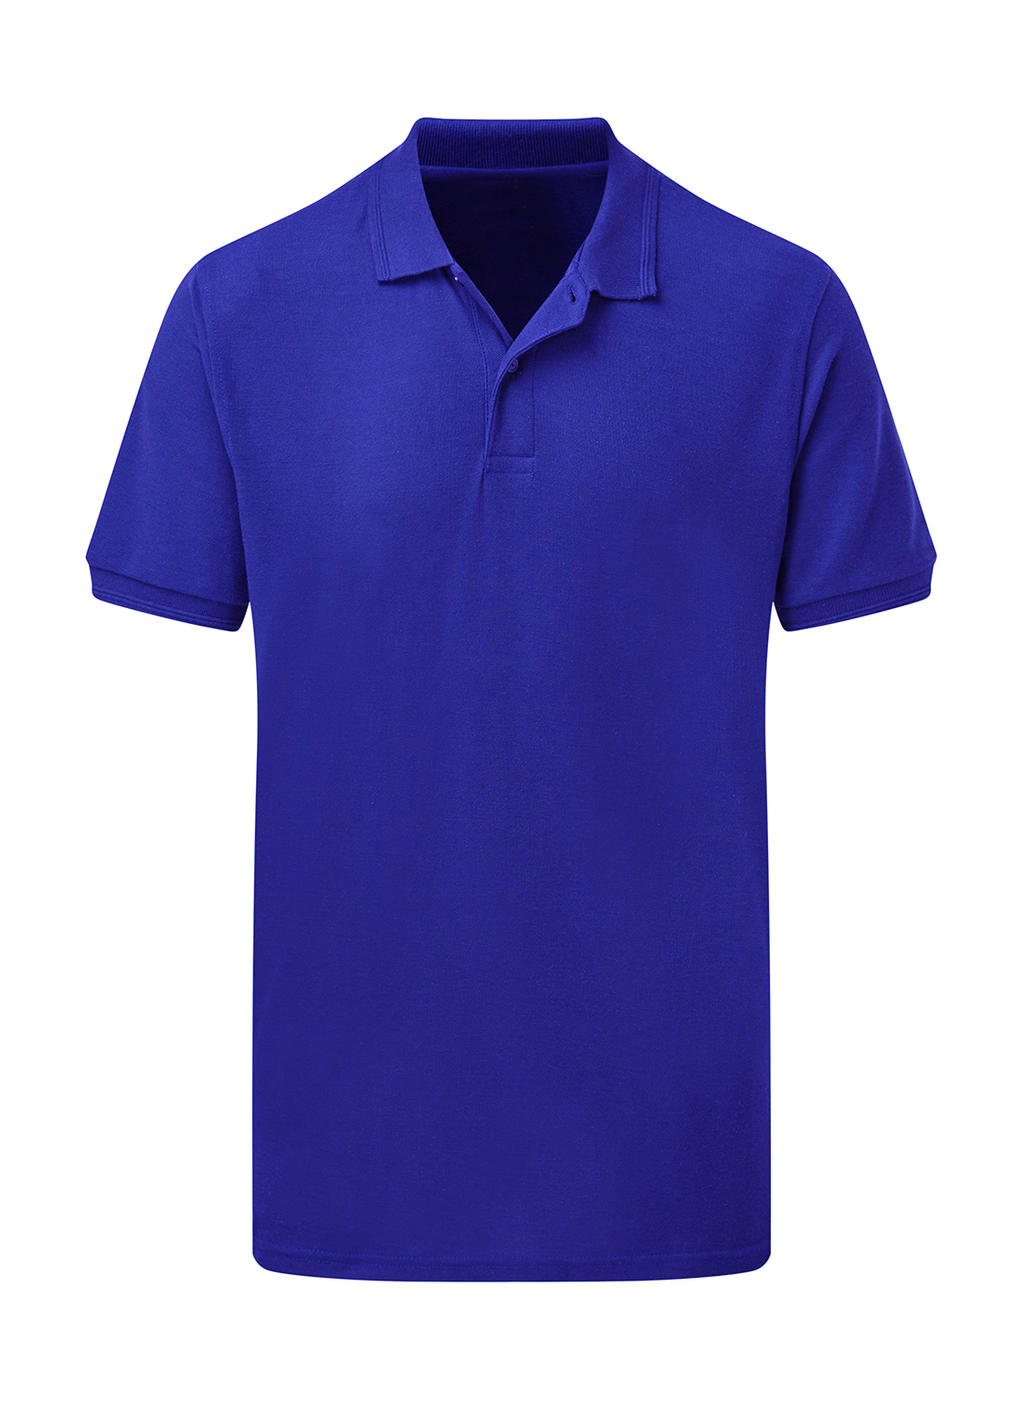  Mens Poly Cotton Polo in Farbe Royal Blue